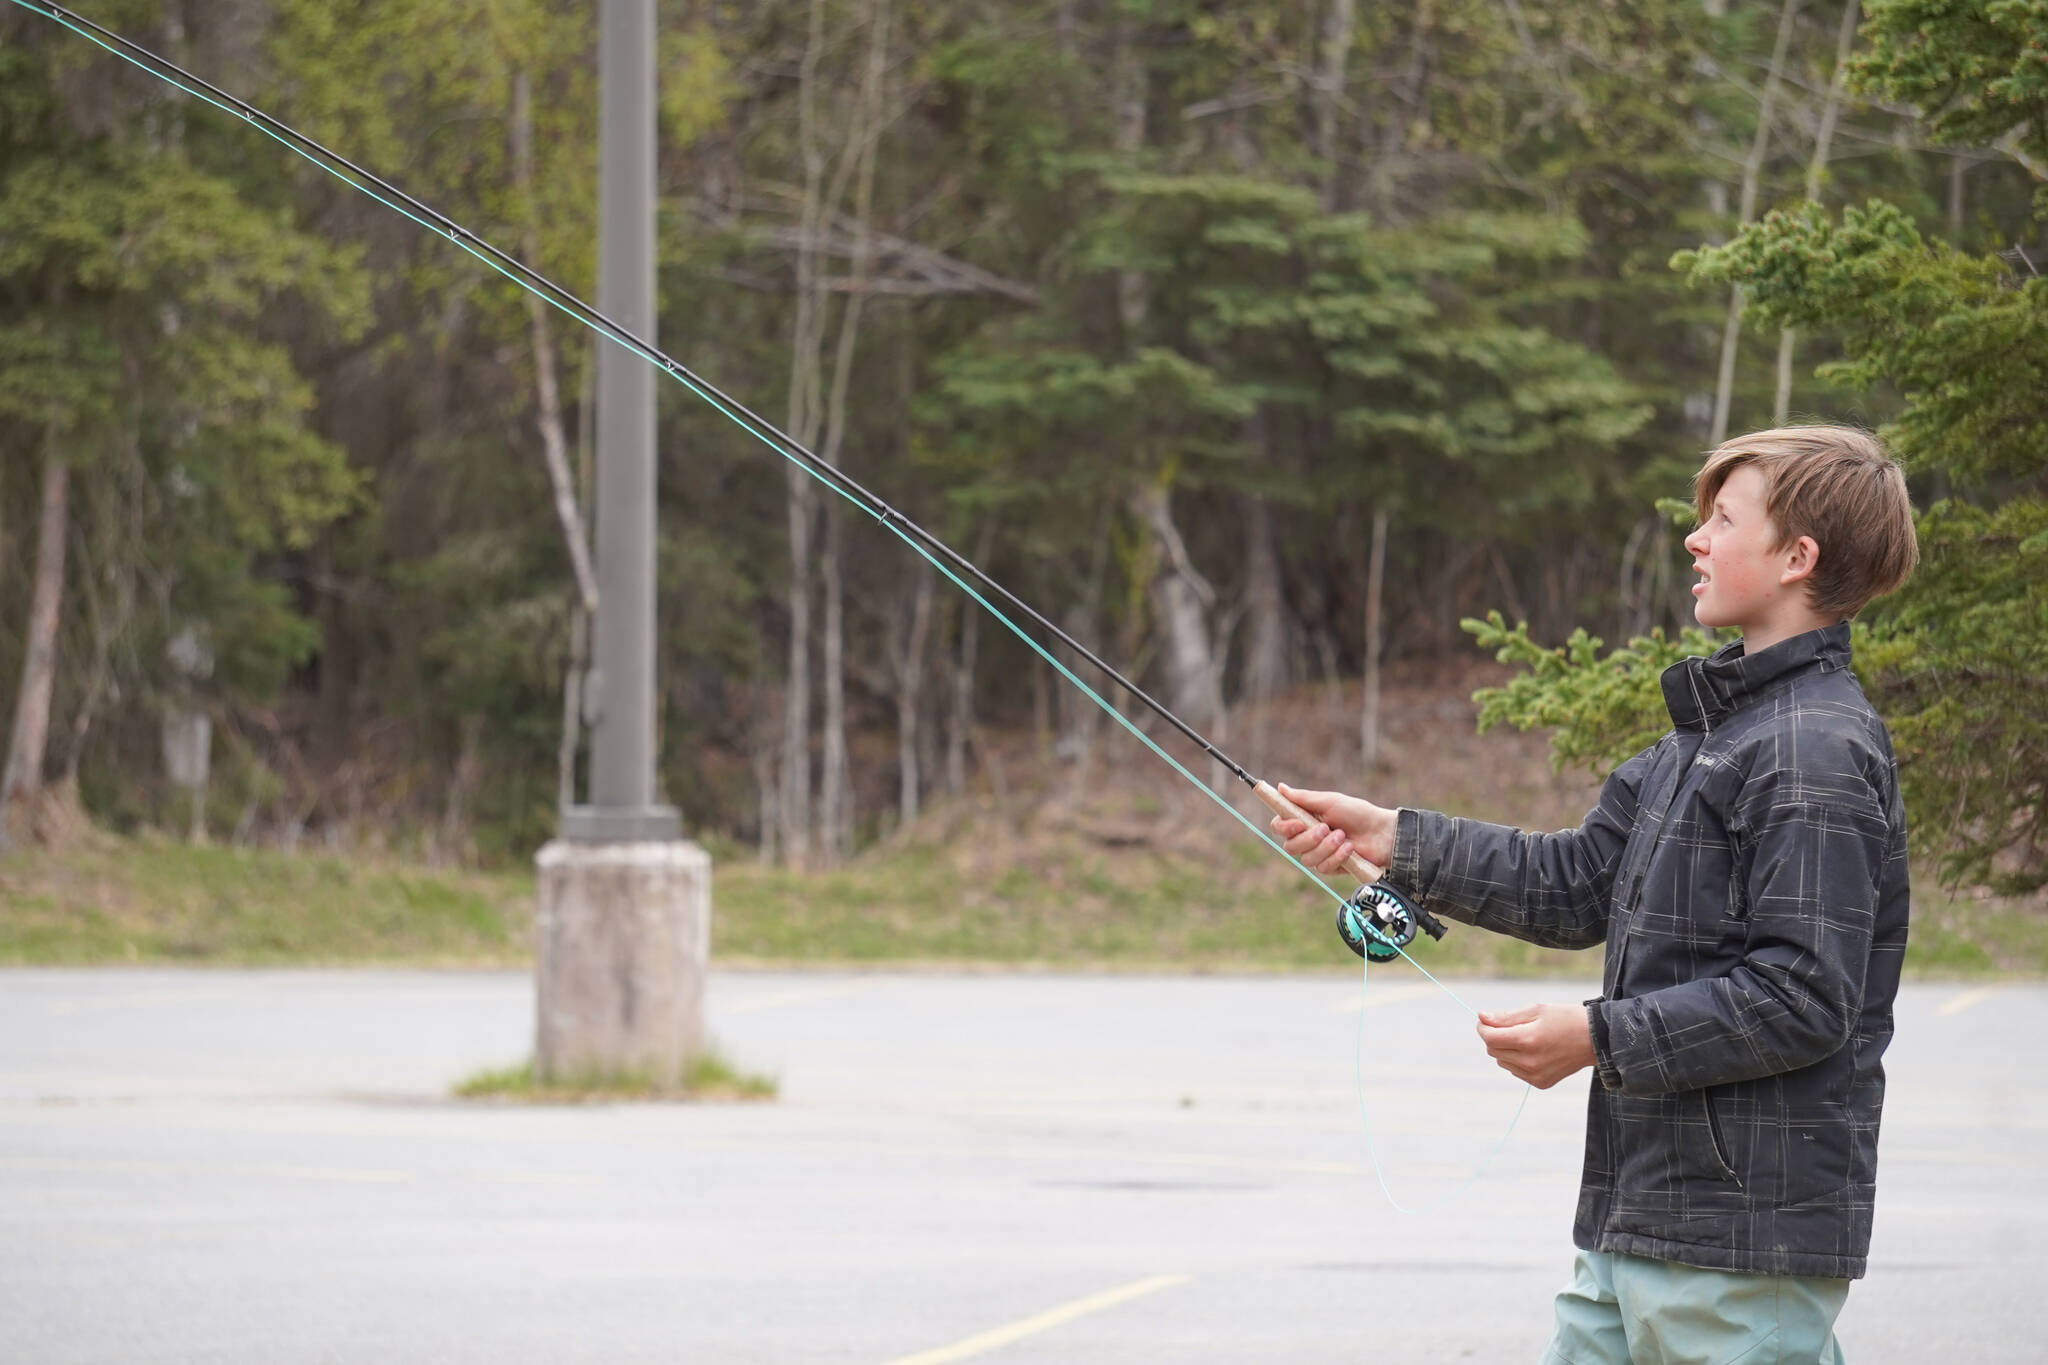 Ethan Anderson practices fly casting in the parking lot of the Donald E. Gilman Kenai River Center in Soldotna, Alaska, during a kids camp put on by Trout Unlimited on Wednesday, May 24, 2023. (Jake Dye/Peninsula Clarion)